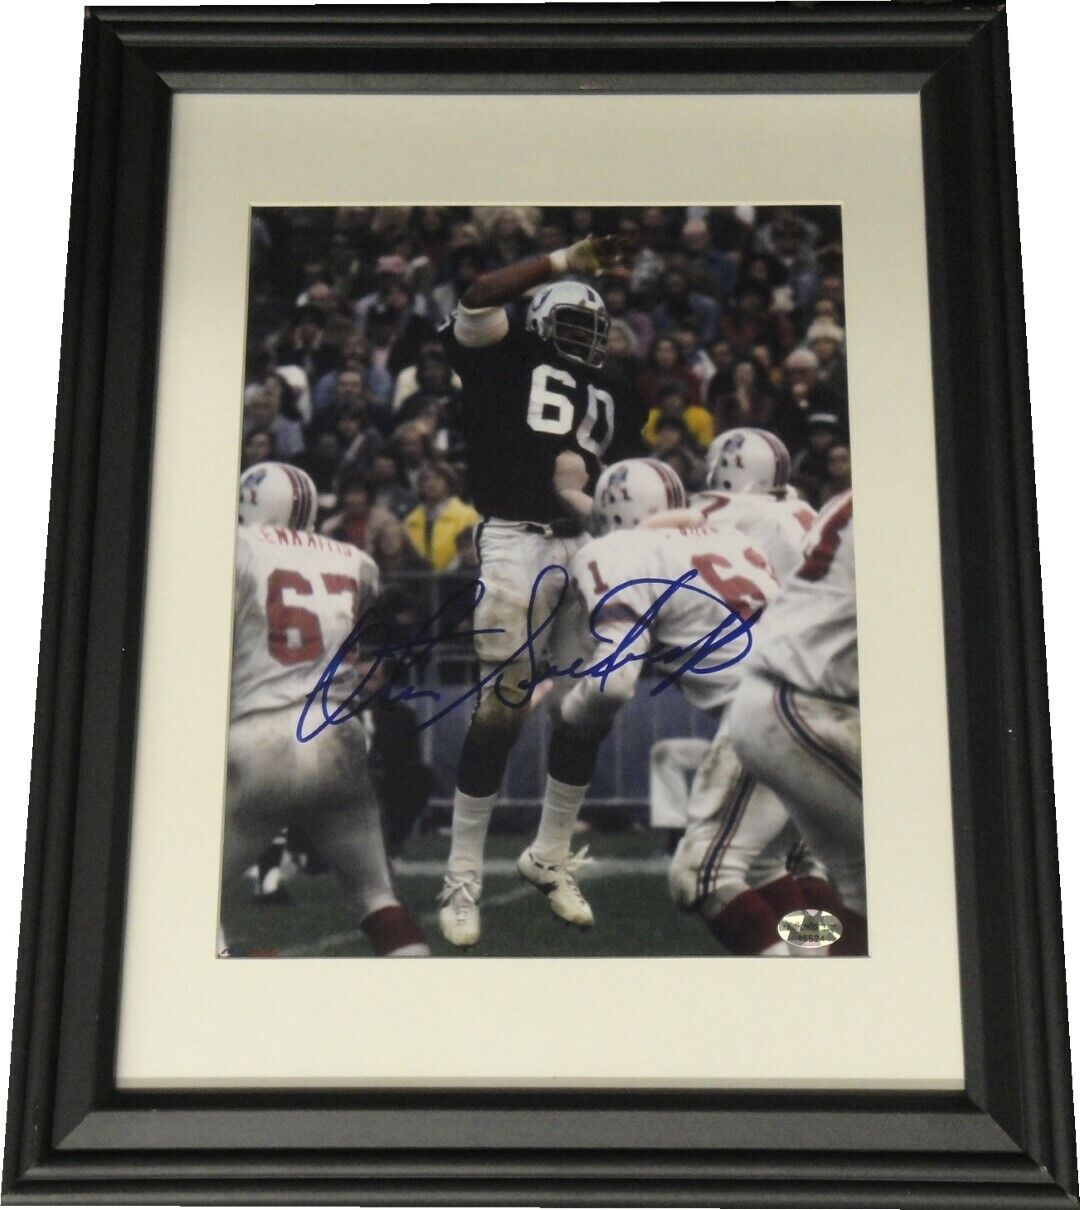 Otis Sistrunk Hand Signed Autographed 8x10 Photo Poster painting Custom Framed Oakland Raiders